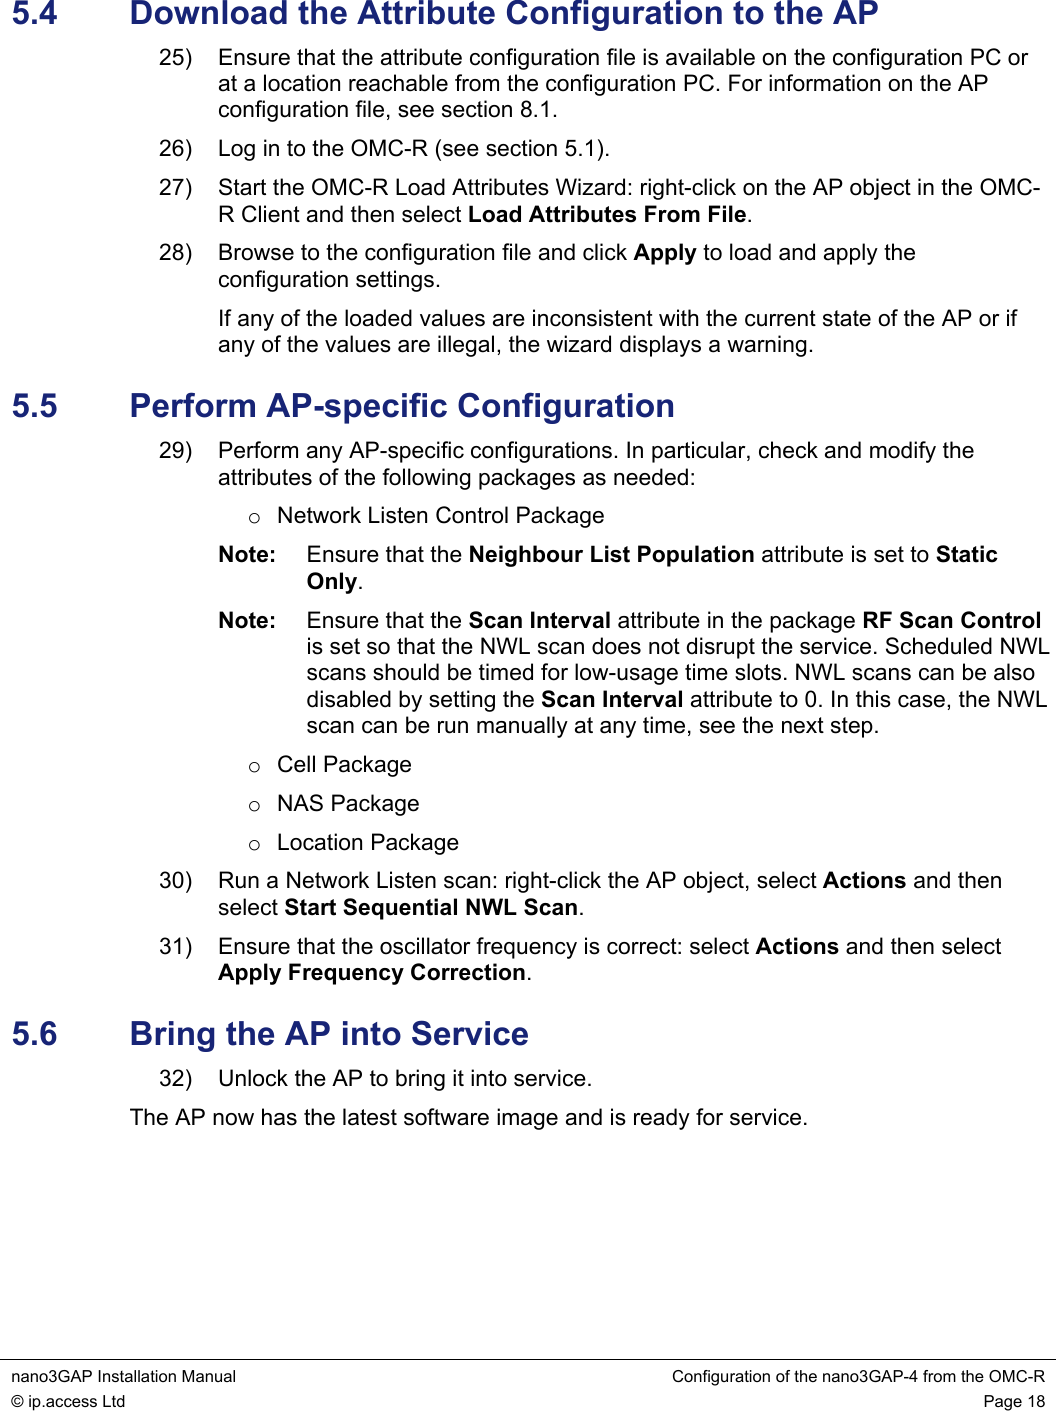  nano3GAP Installation Manual  Configuration of the nano3GAP-4 from the OMC-R © ip.access Ltd  Page 18  5.4  Download the Attribute Configuration to the AP 25)  Ensure that the attribute configuration file is available on the configuration PC or at a location reachable from the configuration PC. For information on the AP configuration file, see section 8.1. 26)  Log in to the OMC-R (see section 5.1). 27)  Start the OMC-R Load Attributes Wizard: right-click on the AP object in the OMC-R Client and then select Load Attributes From File. 28)  Browse to the configuration file and click Apply to load and apply the configuration settings. If any of the loaded values are inconsistent with the current state of the AP or if any of the values are illegal, the wizard displays a warning. 5.5  Perform AP-specific Configuration 29)  Perform any AP-specific configurations. In particular, check and modify the attributes of the following packages as needed: o  Network Listen Control Package Note:  Ensure that the Neighbour List Population attribute is set to Static Only. Note:  Ensure that the Scan Interval attribute in the package RF Scan Control is set so that the NWL scan does not disrupt the service. Scheduled NWL scans should be timed for low-usage time slots. NWL scans can be also disabled by setting the Scan Interval attribute to 0. In this case, the NWL scan can be run manually at any time, see the next step. o Cell Package o NAS Package o Location Package 30)  Run a Network Listen scan: right-click the AP object, select Actions and then select Start Sequential NWL Scan. 31)  Ensure that the oscillator frequency is correct: select Actions and then select Apply Frequency Correction. 5.6  Bring the AP into Service 32)  Unlock the AP to bring it into service. The AP now has the latest software image and is ready for service.  